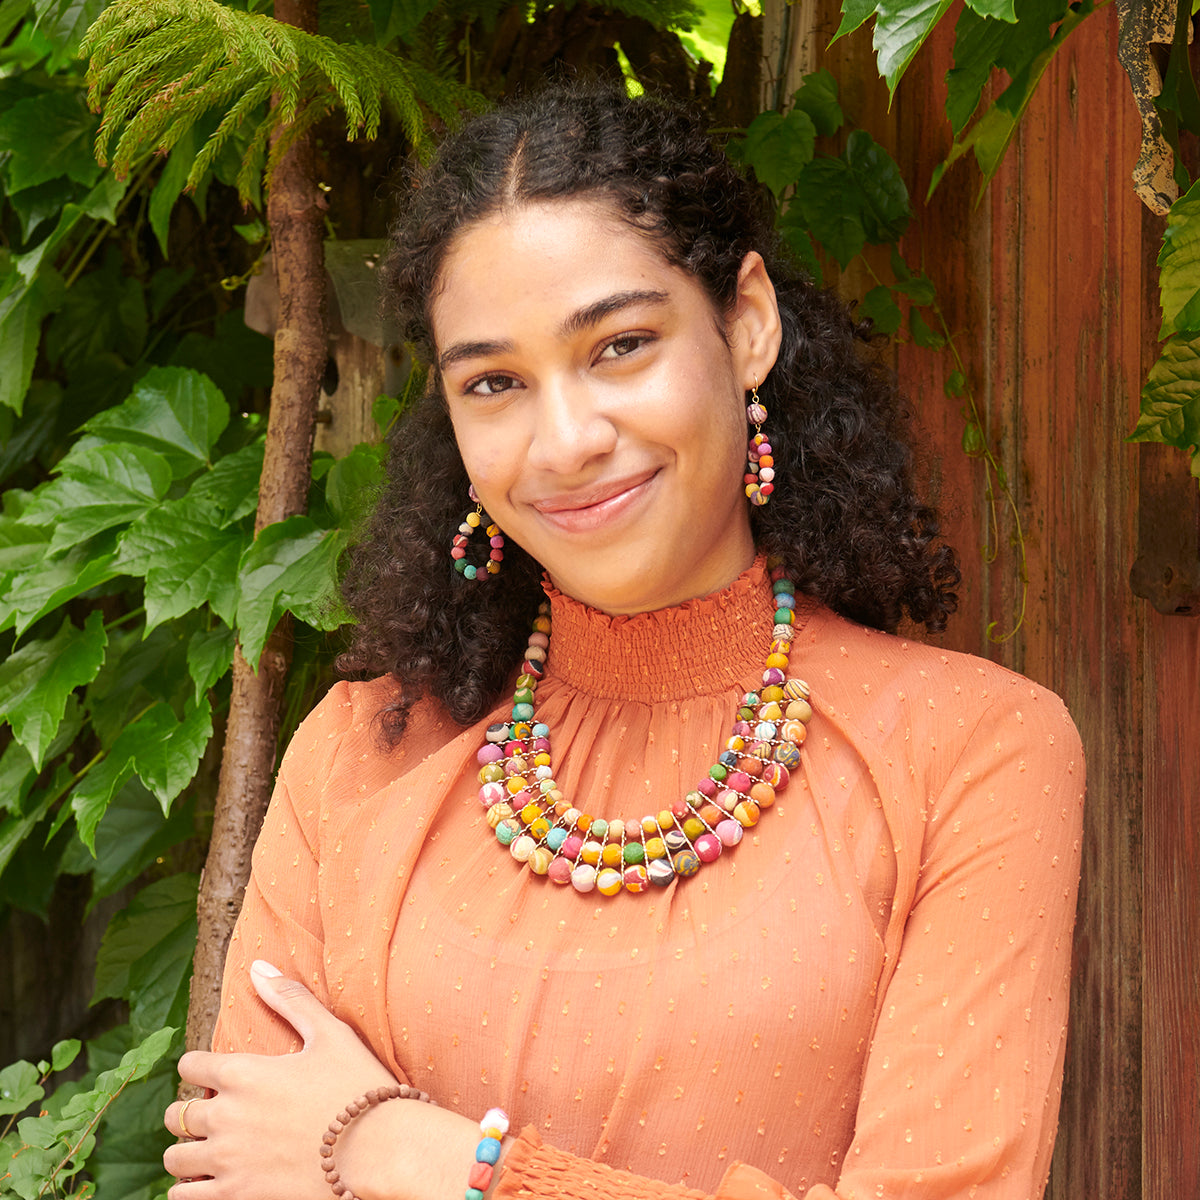 A model smiles while wearing the Kantha Gilded Collar Necklace.